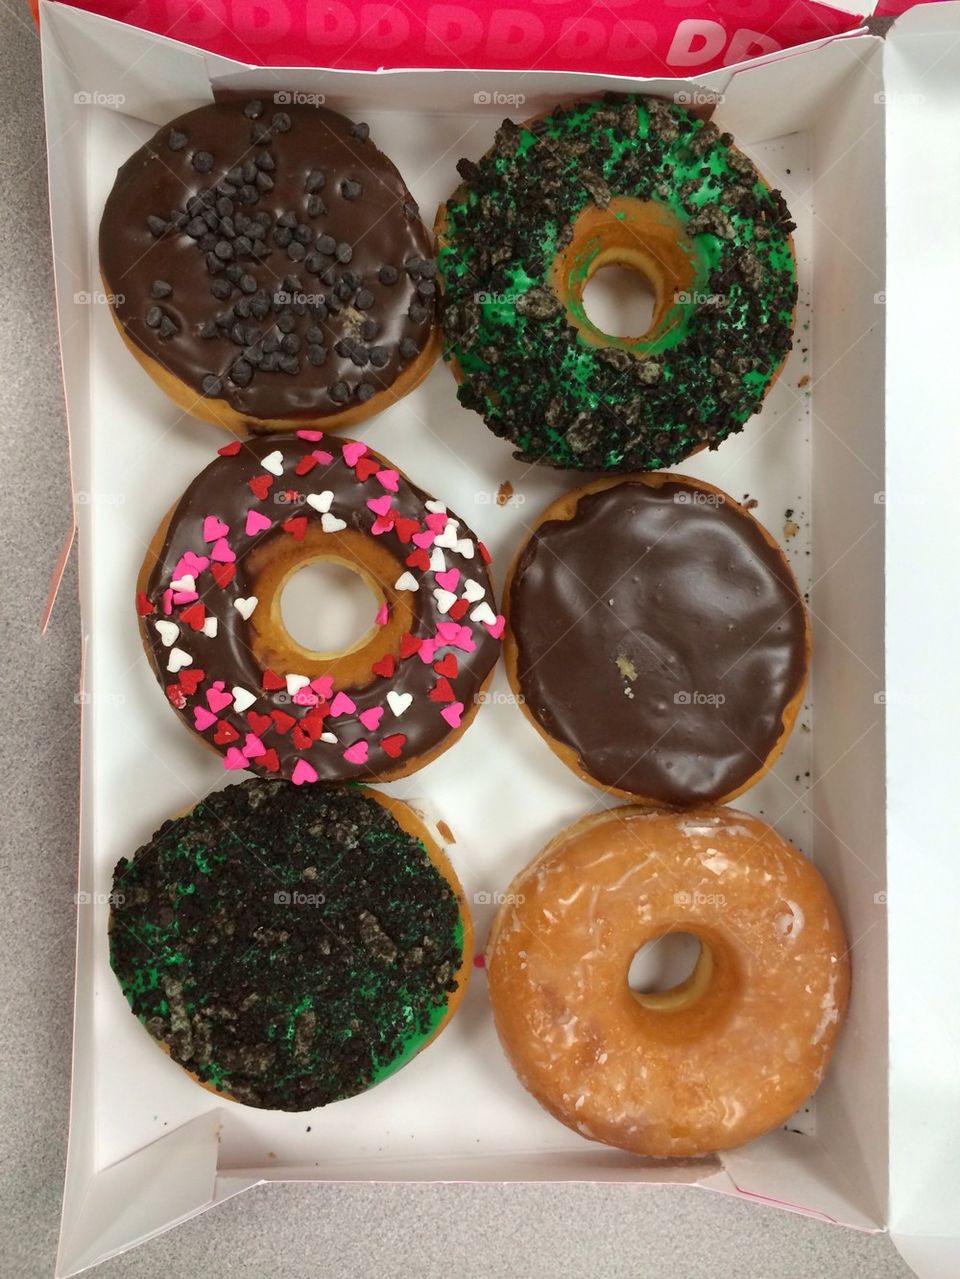 Donuts from Dunkin Donuts